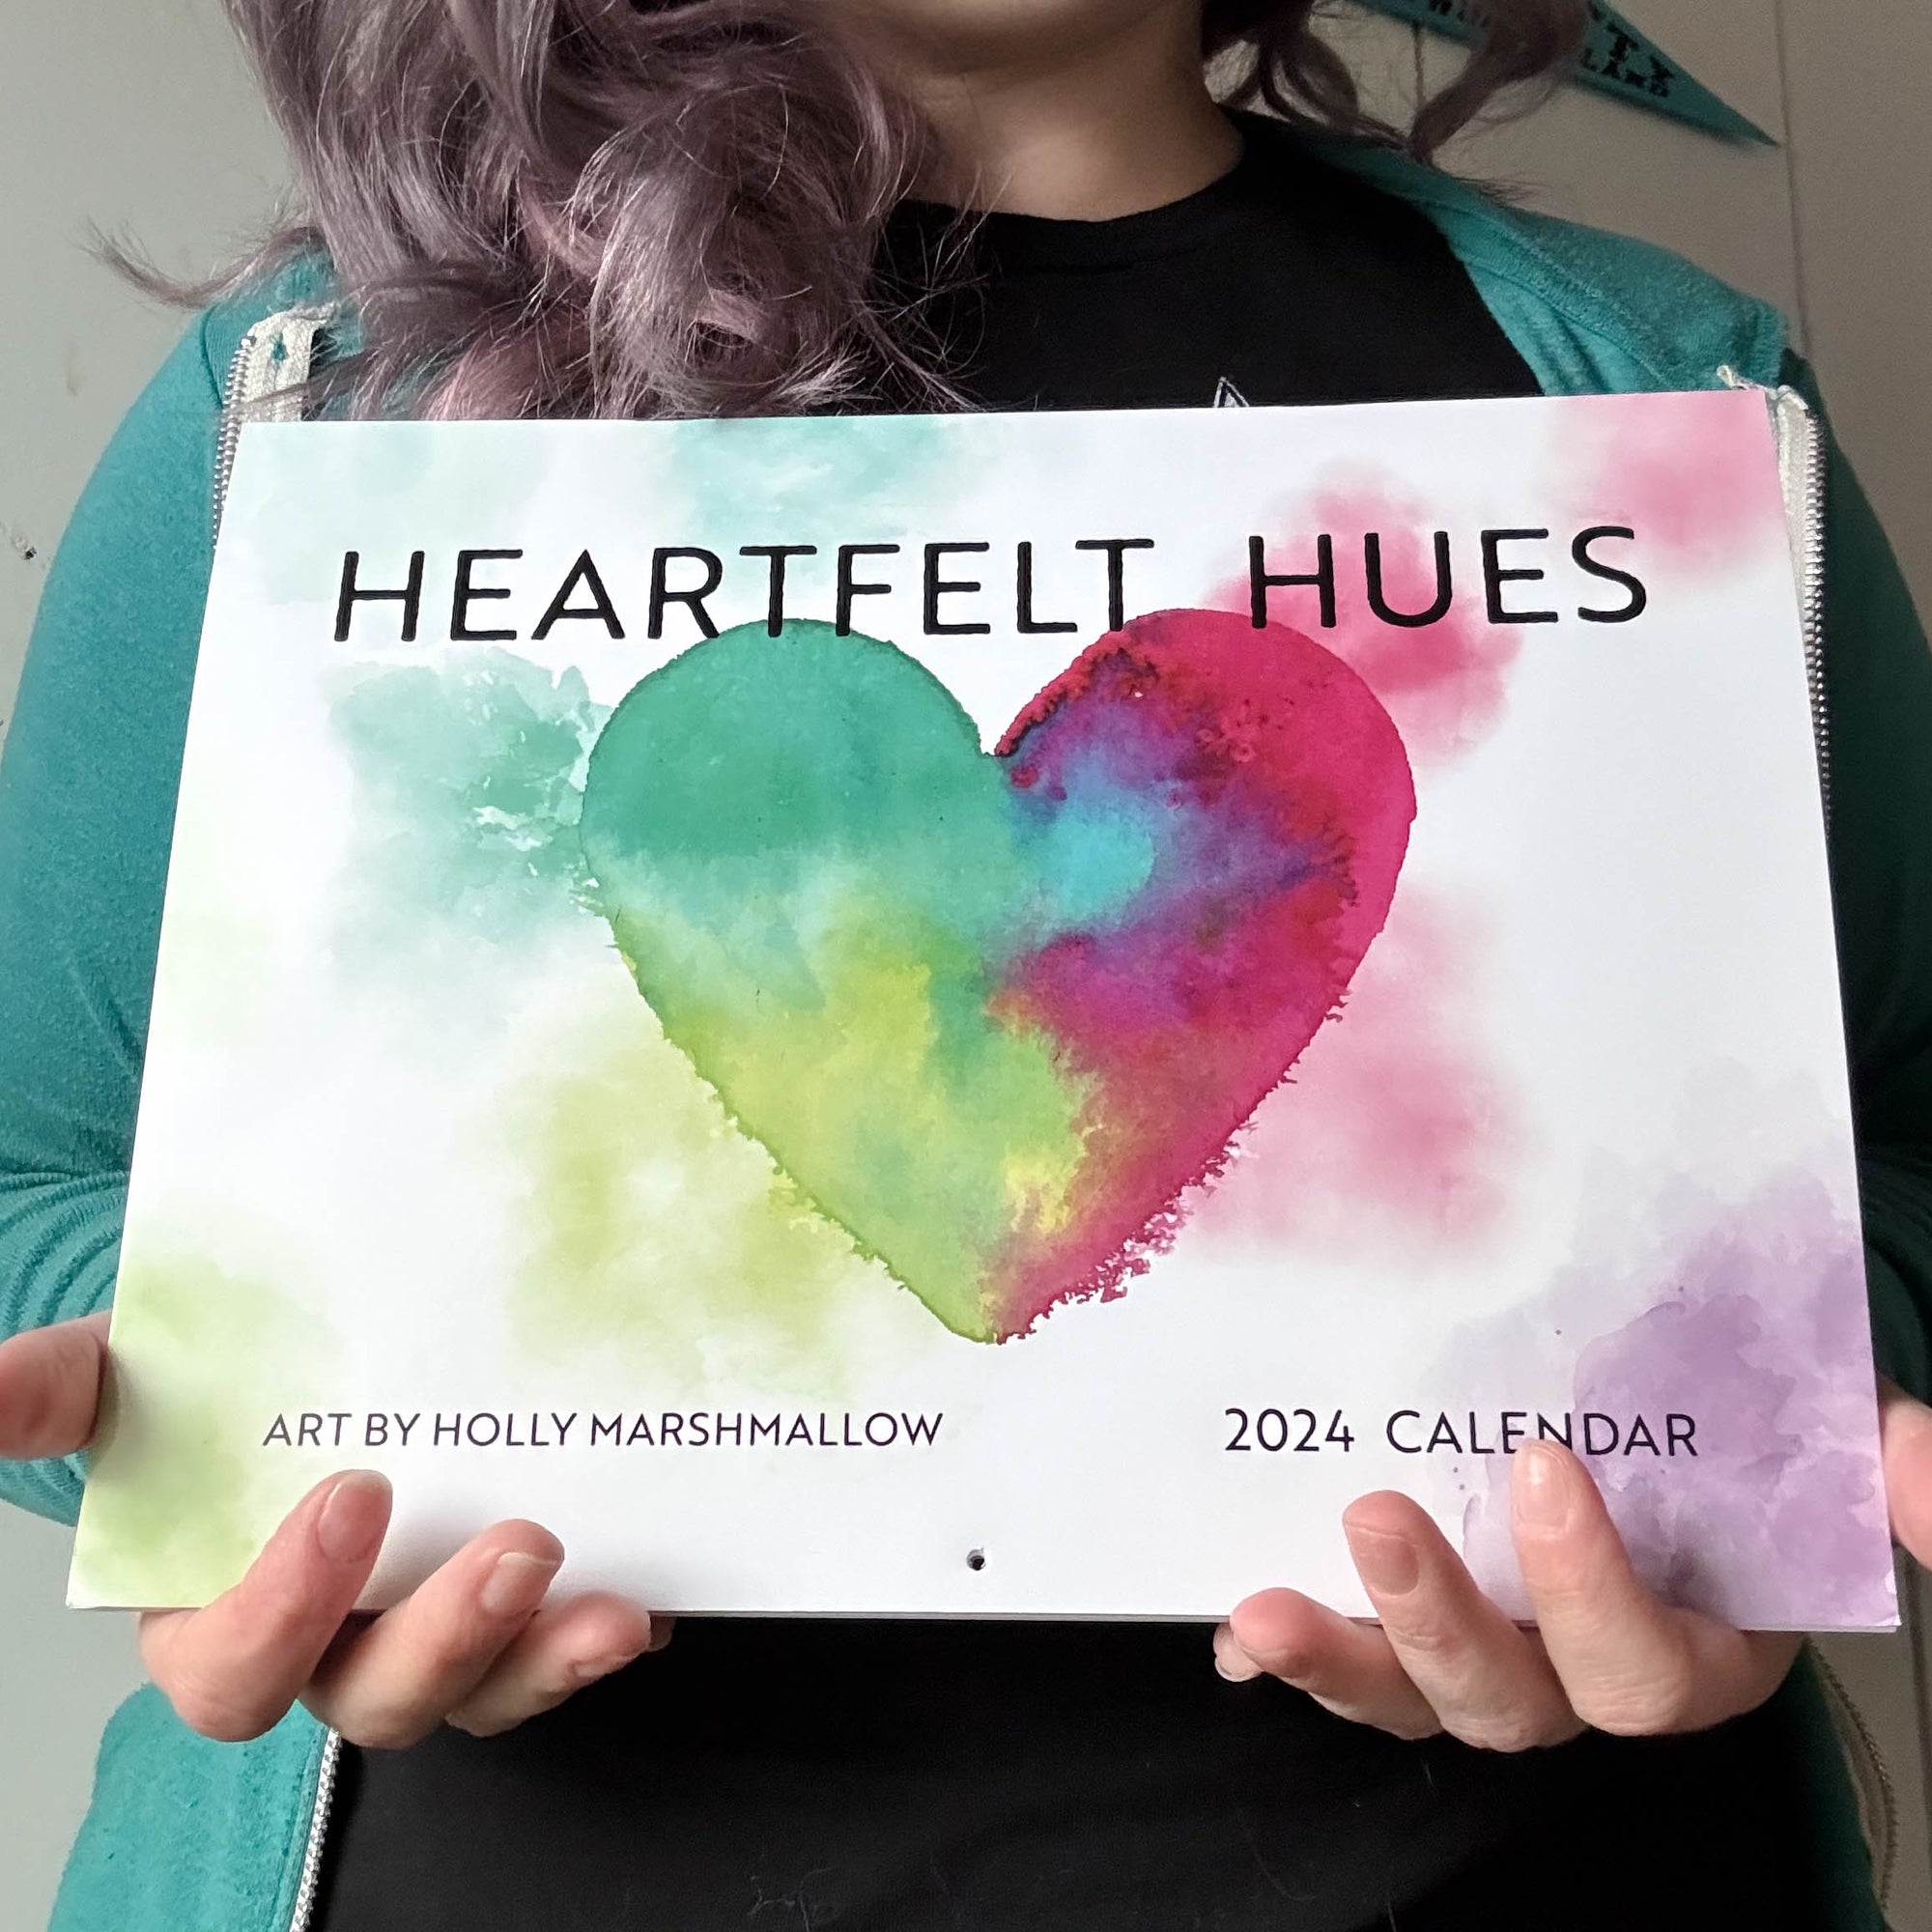 a white woman with purple hair and a teal hoodie holding the heartfelt hues calendar